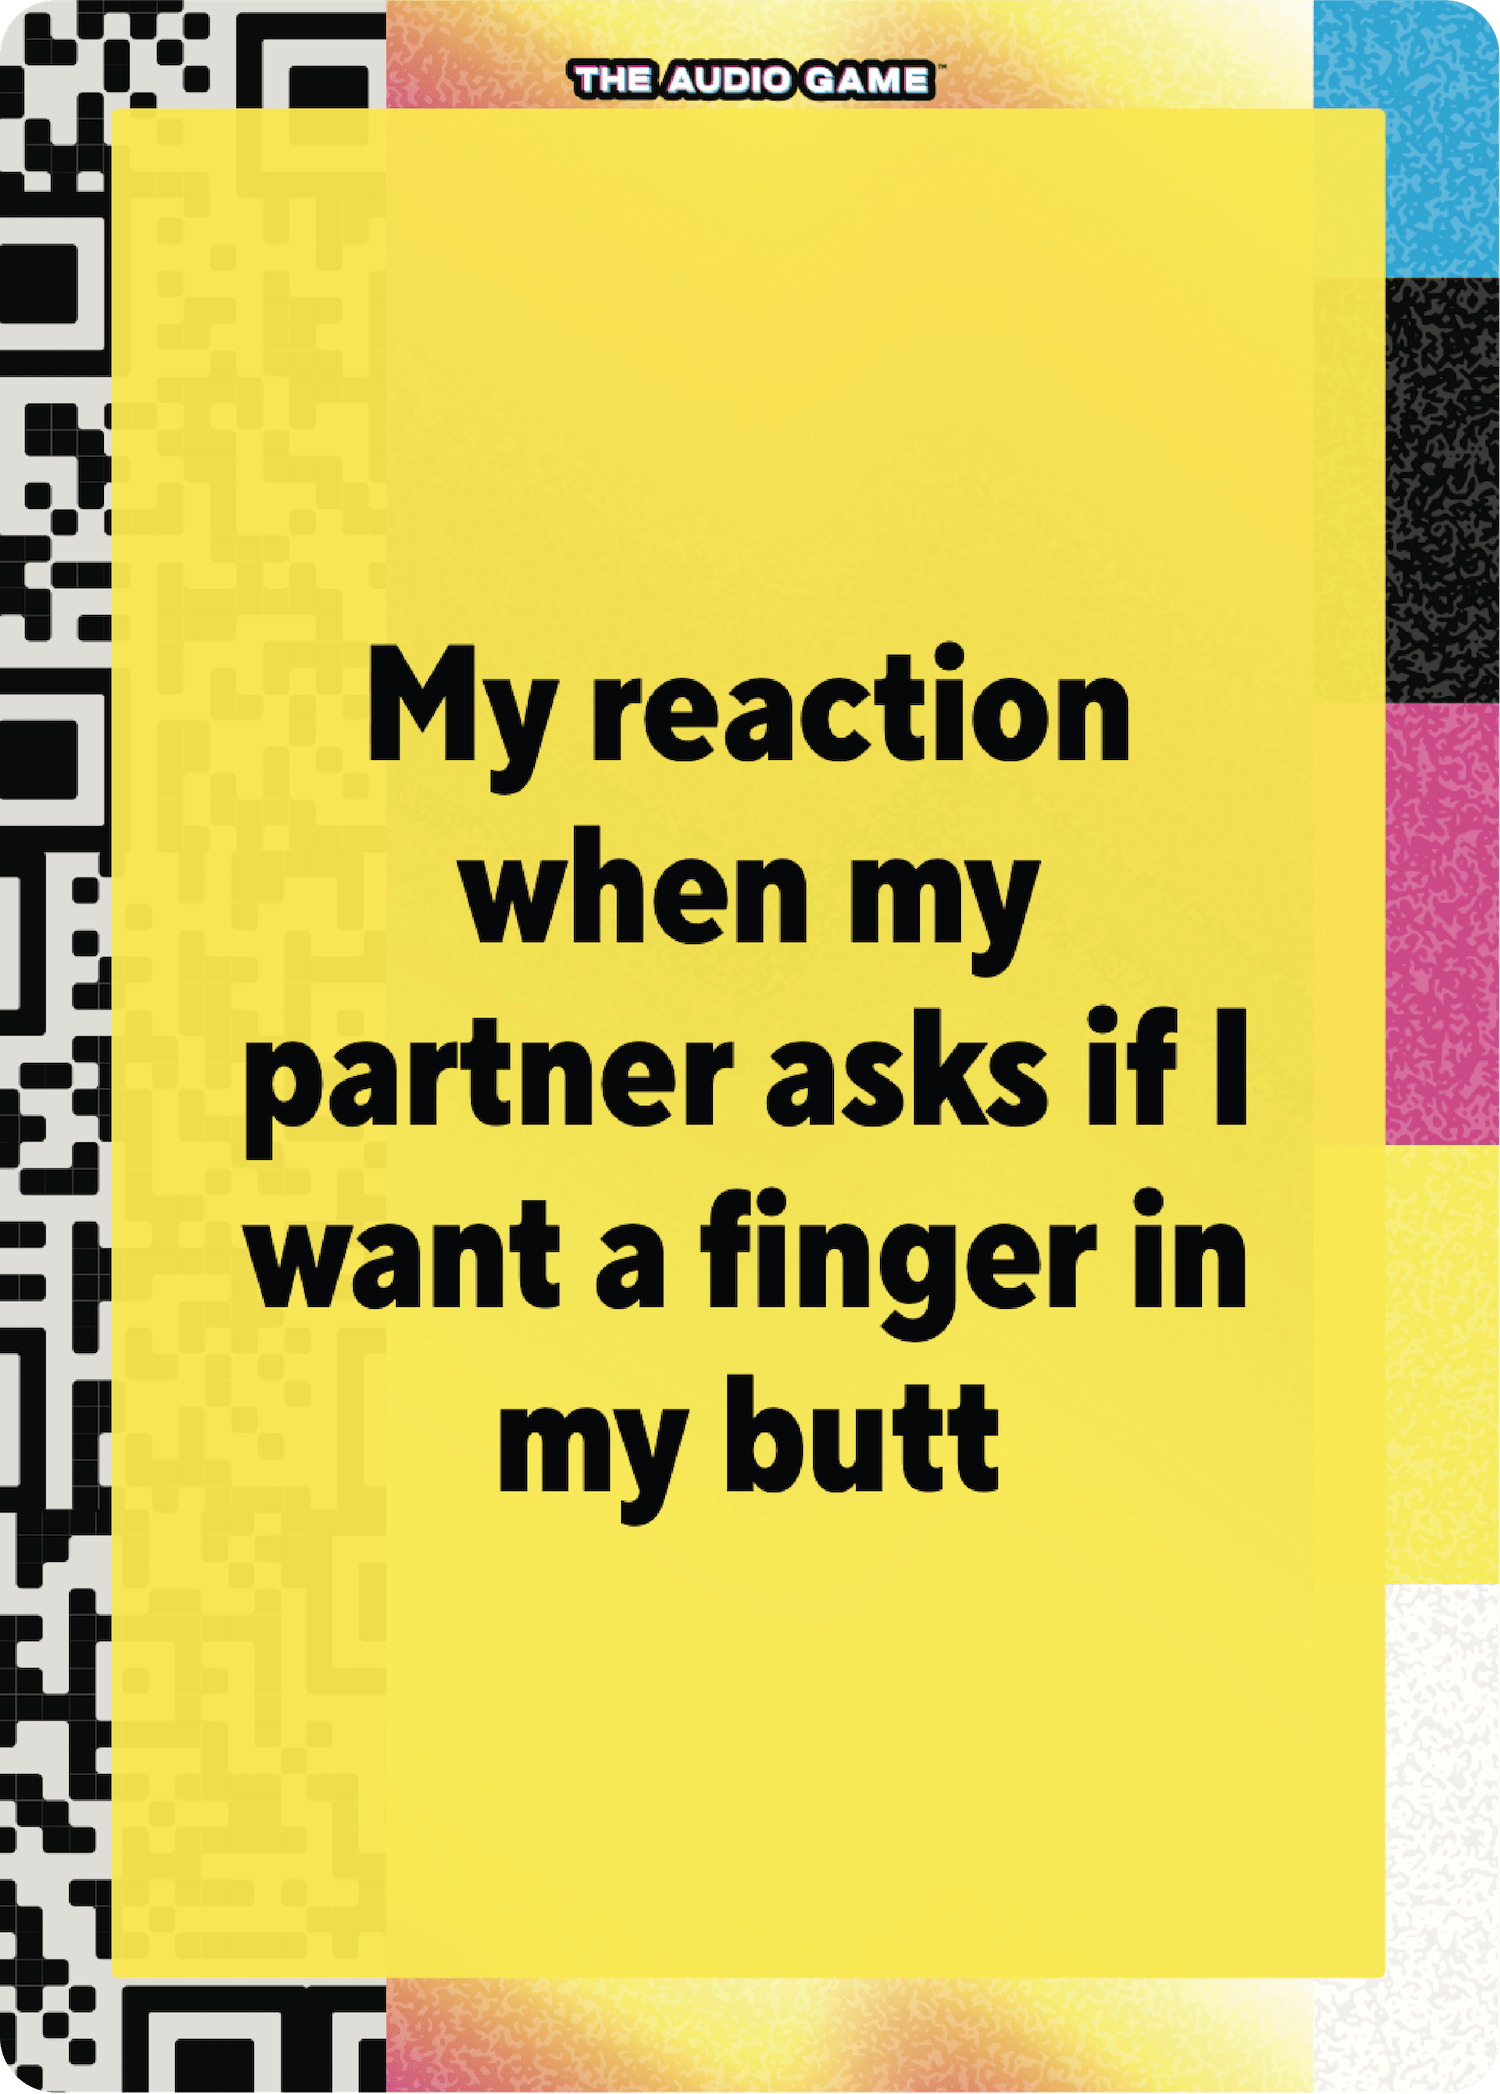 My reaction when my partner asks if I want a finger in my butt